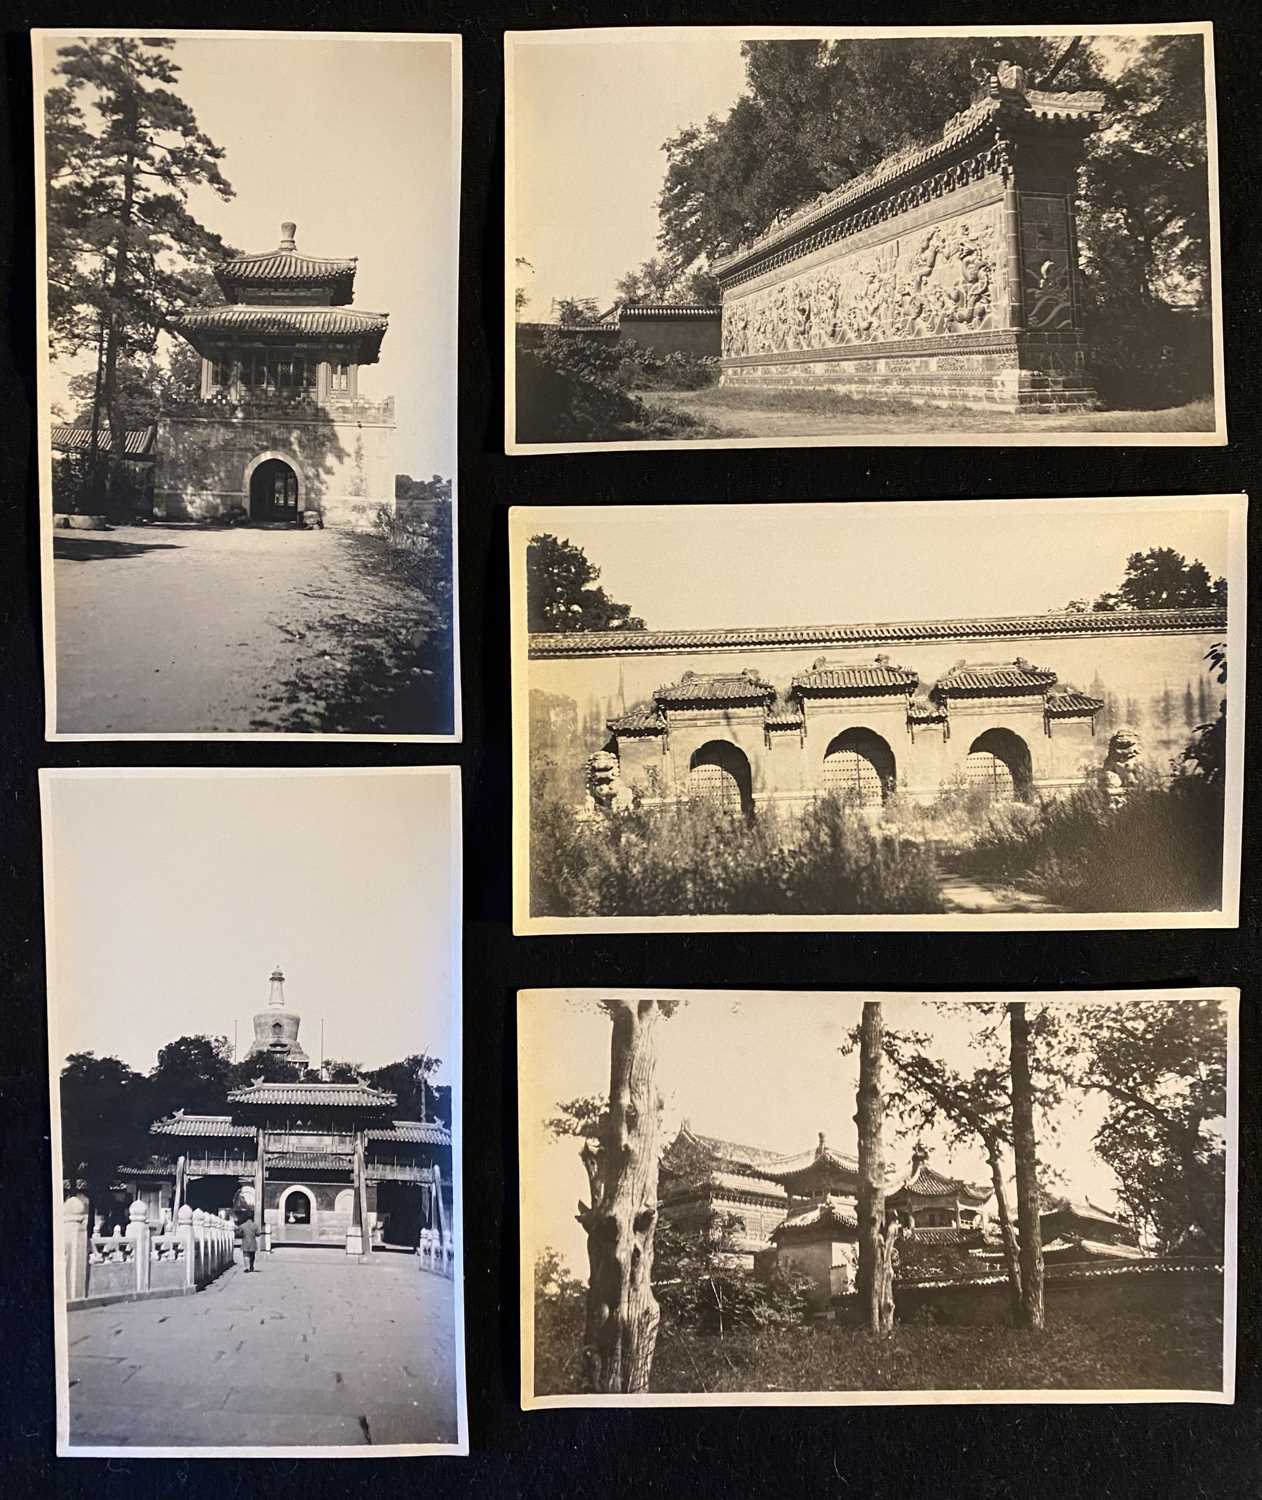 Early 20th century photographs of the 'Winter Palace' and 'Summer Palace', Beijing.